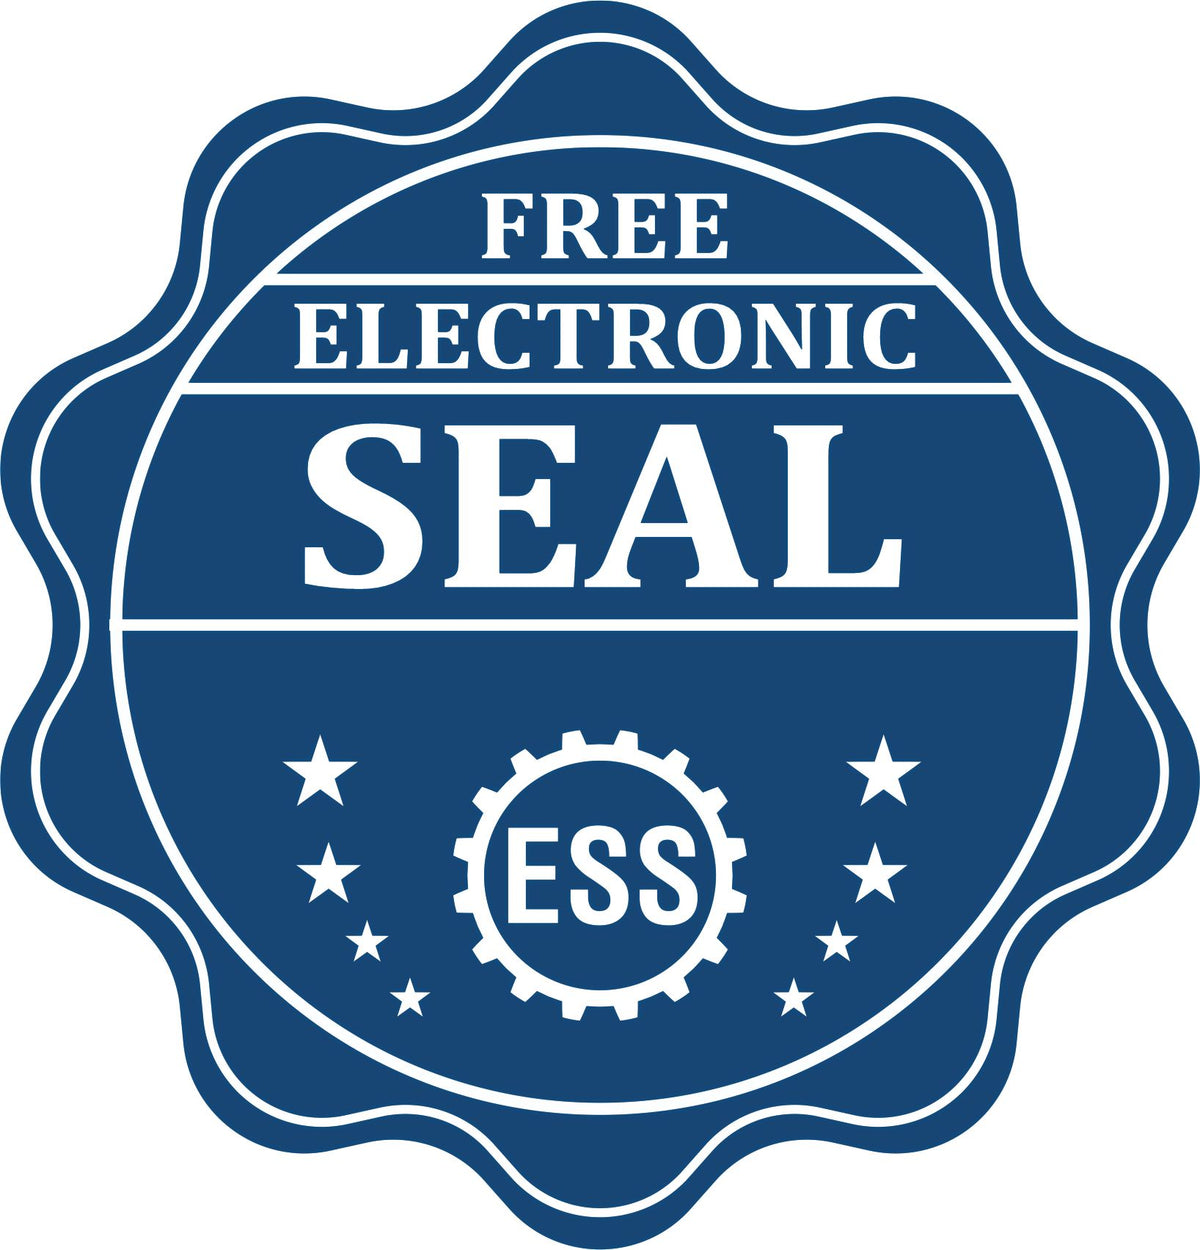 A badge showing a free electronic seal for the Hybrid Idaho Engineer Seal with stars and the ESS gear on the emblem.